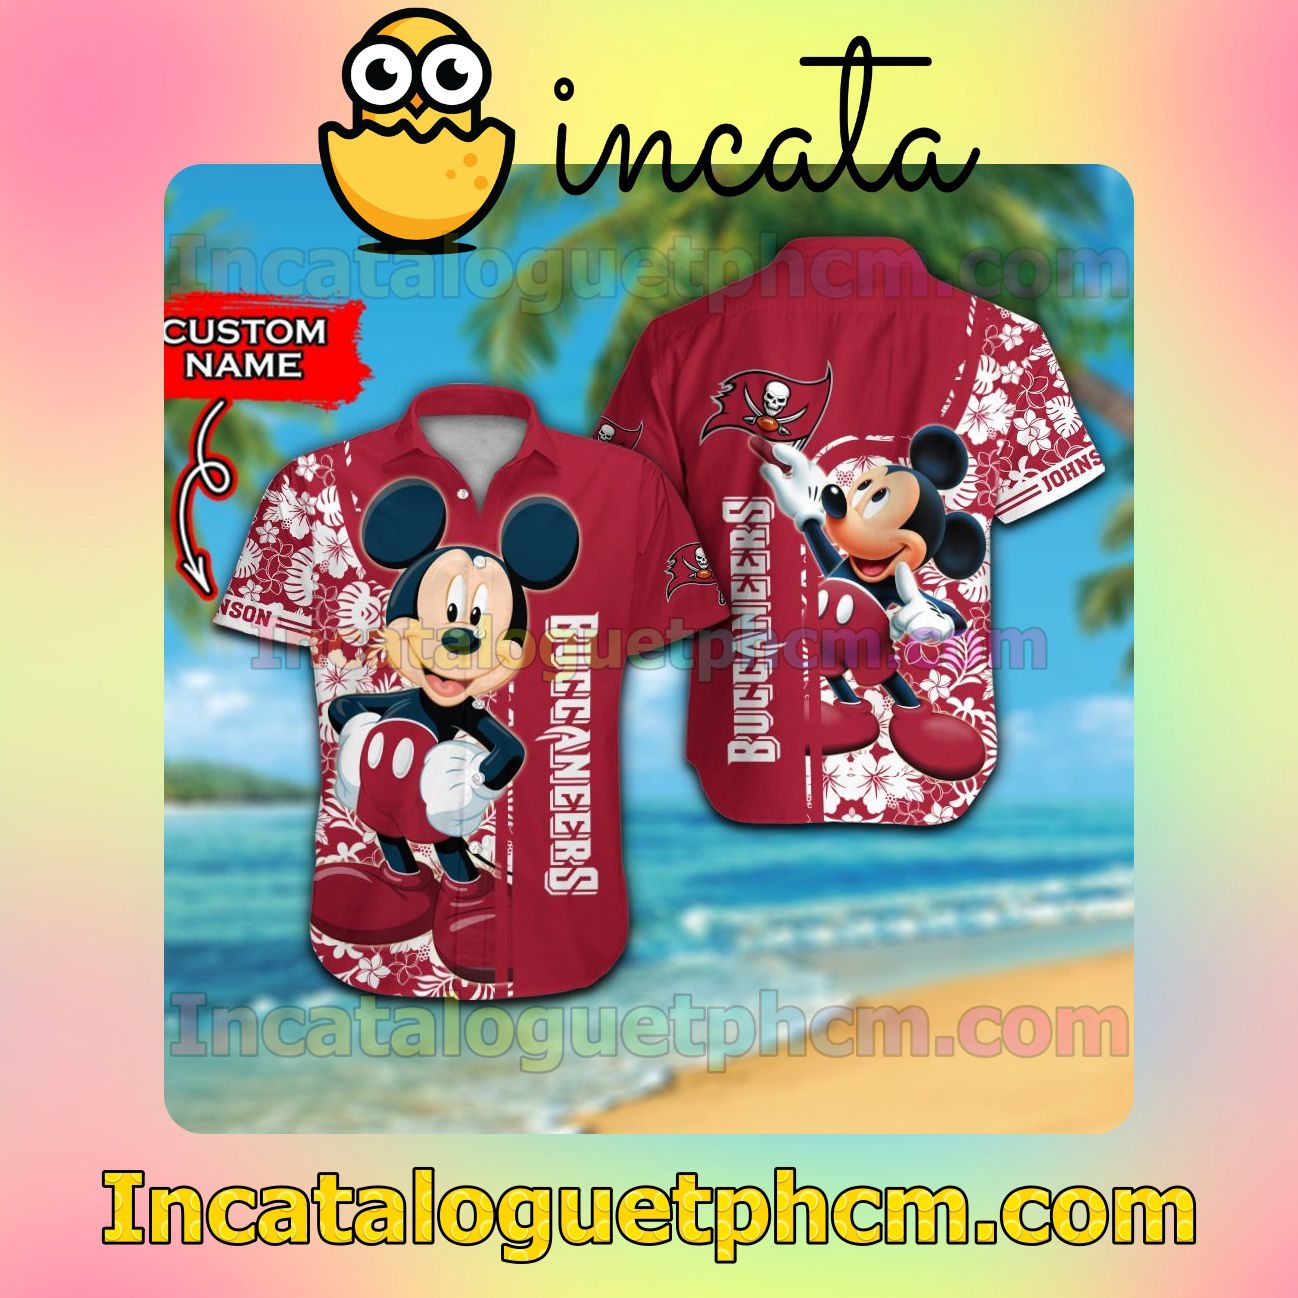 Personalized Tampa Bay Buccaneers & Mickey Mouse Beach Vacation Shirt, Swim Shorts